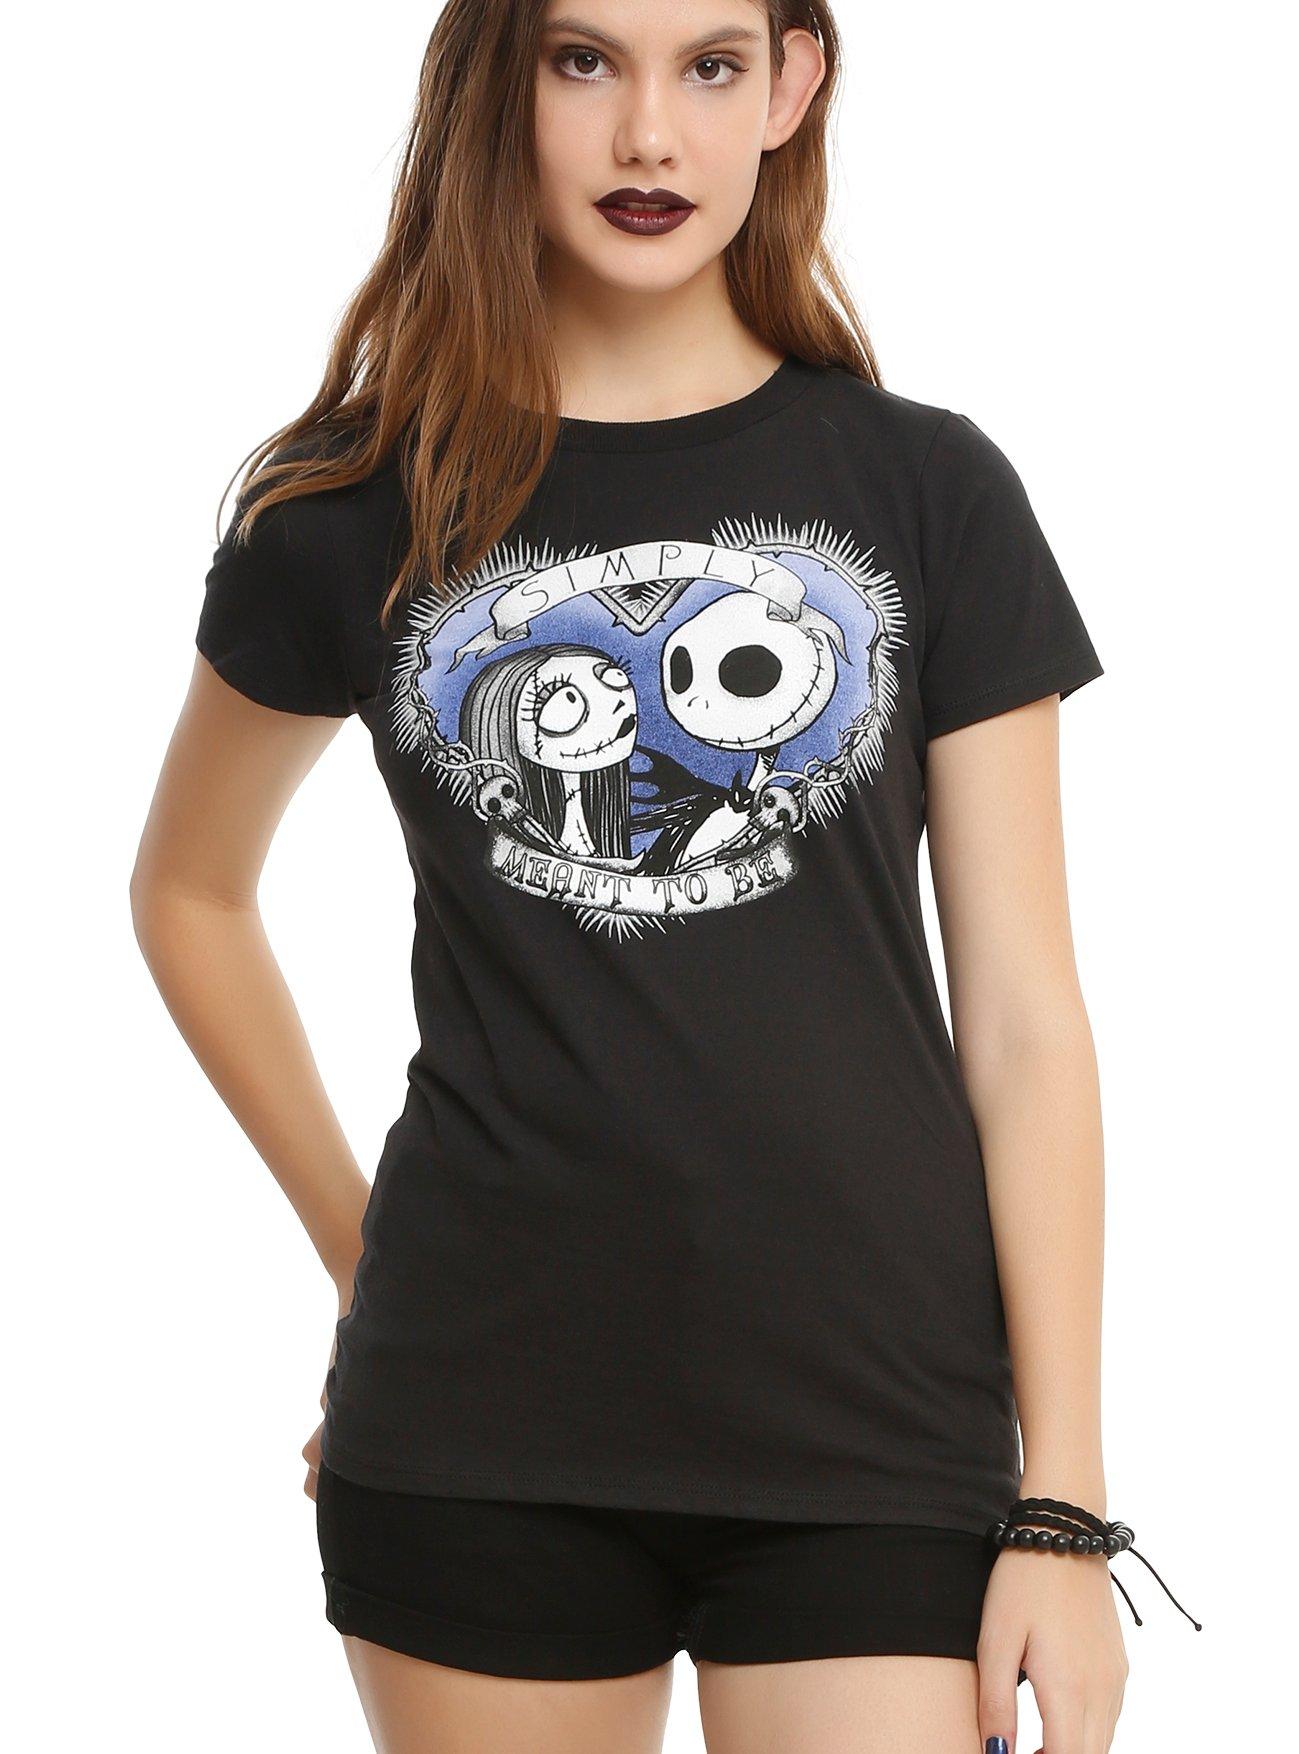 The Nightmare Before Christmas Simply Meant To Be Girls T-Shirt | Hot Topic